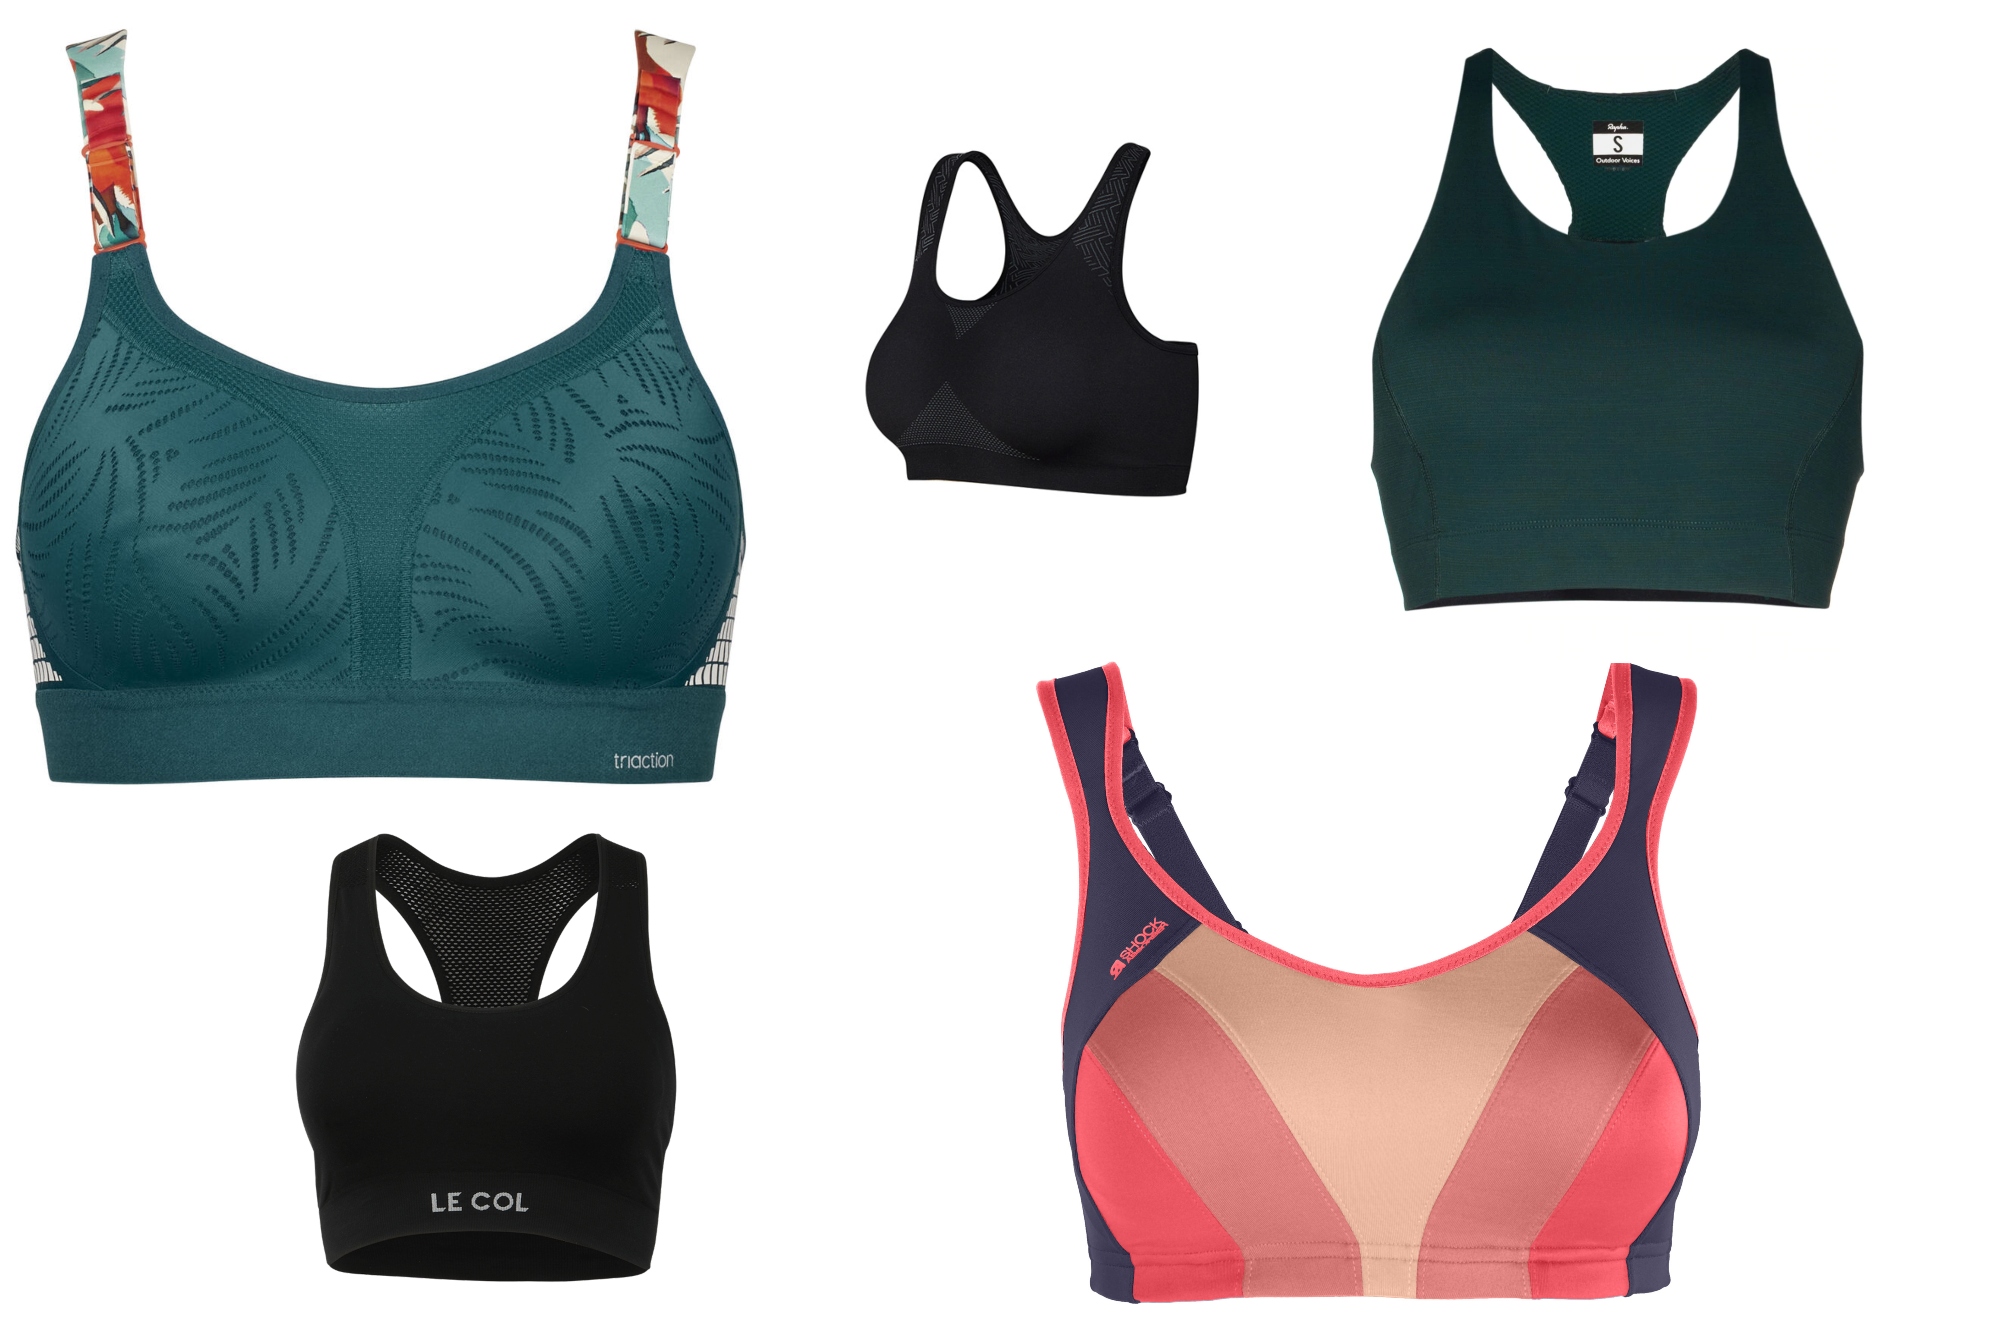 Free online course on sports bras and breast health - Jog Scotland